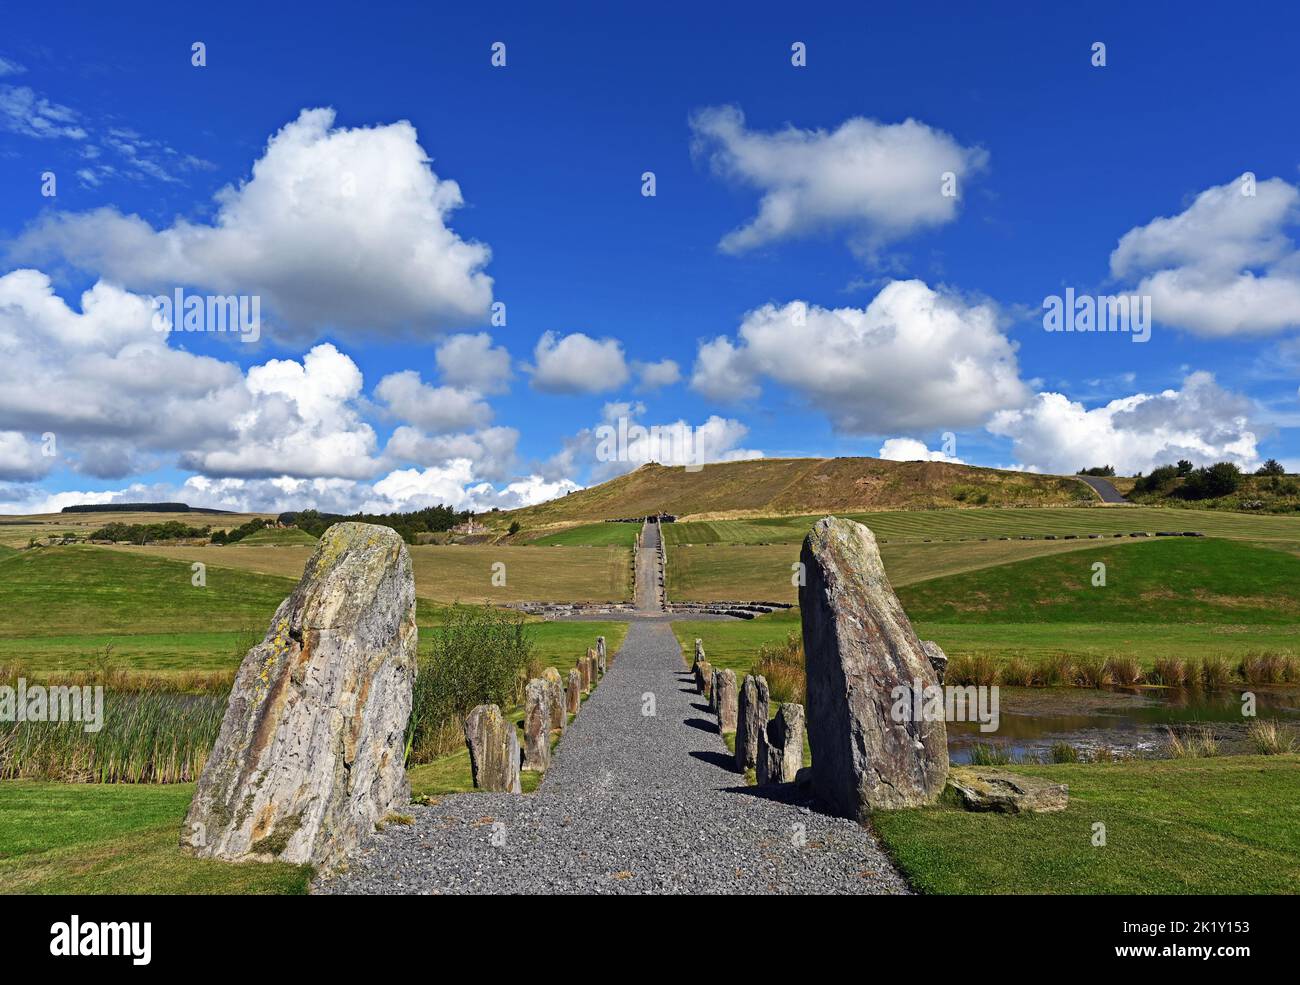 'North-South Line looking North'. Outdoor artwork by Charles Jencks. Crawick Multiverse, Sanquhar, Dumfries and Galloway, Scotland, United Kingdom. Stock Photo